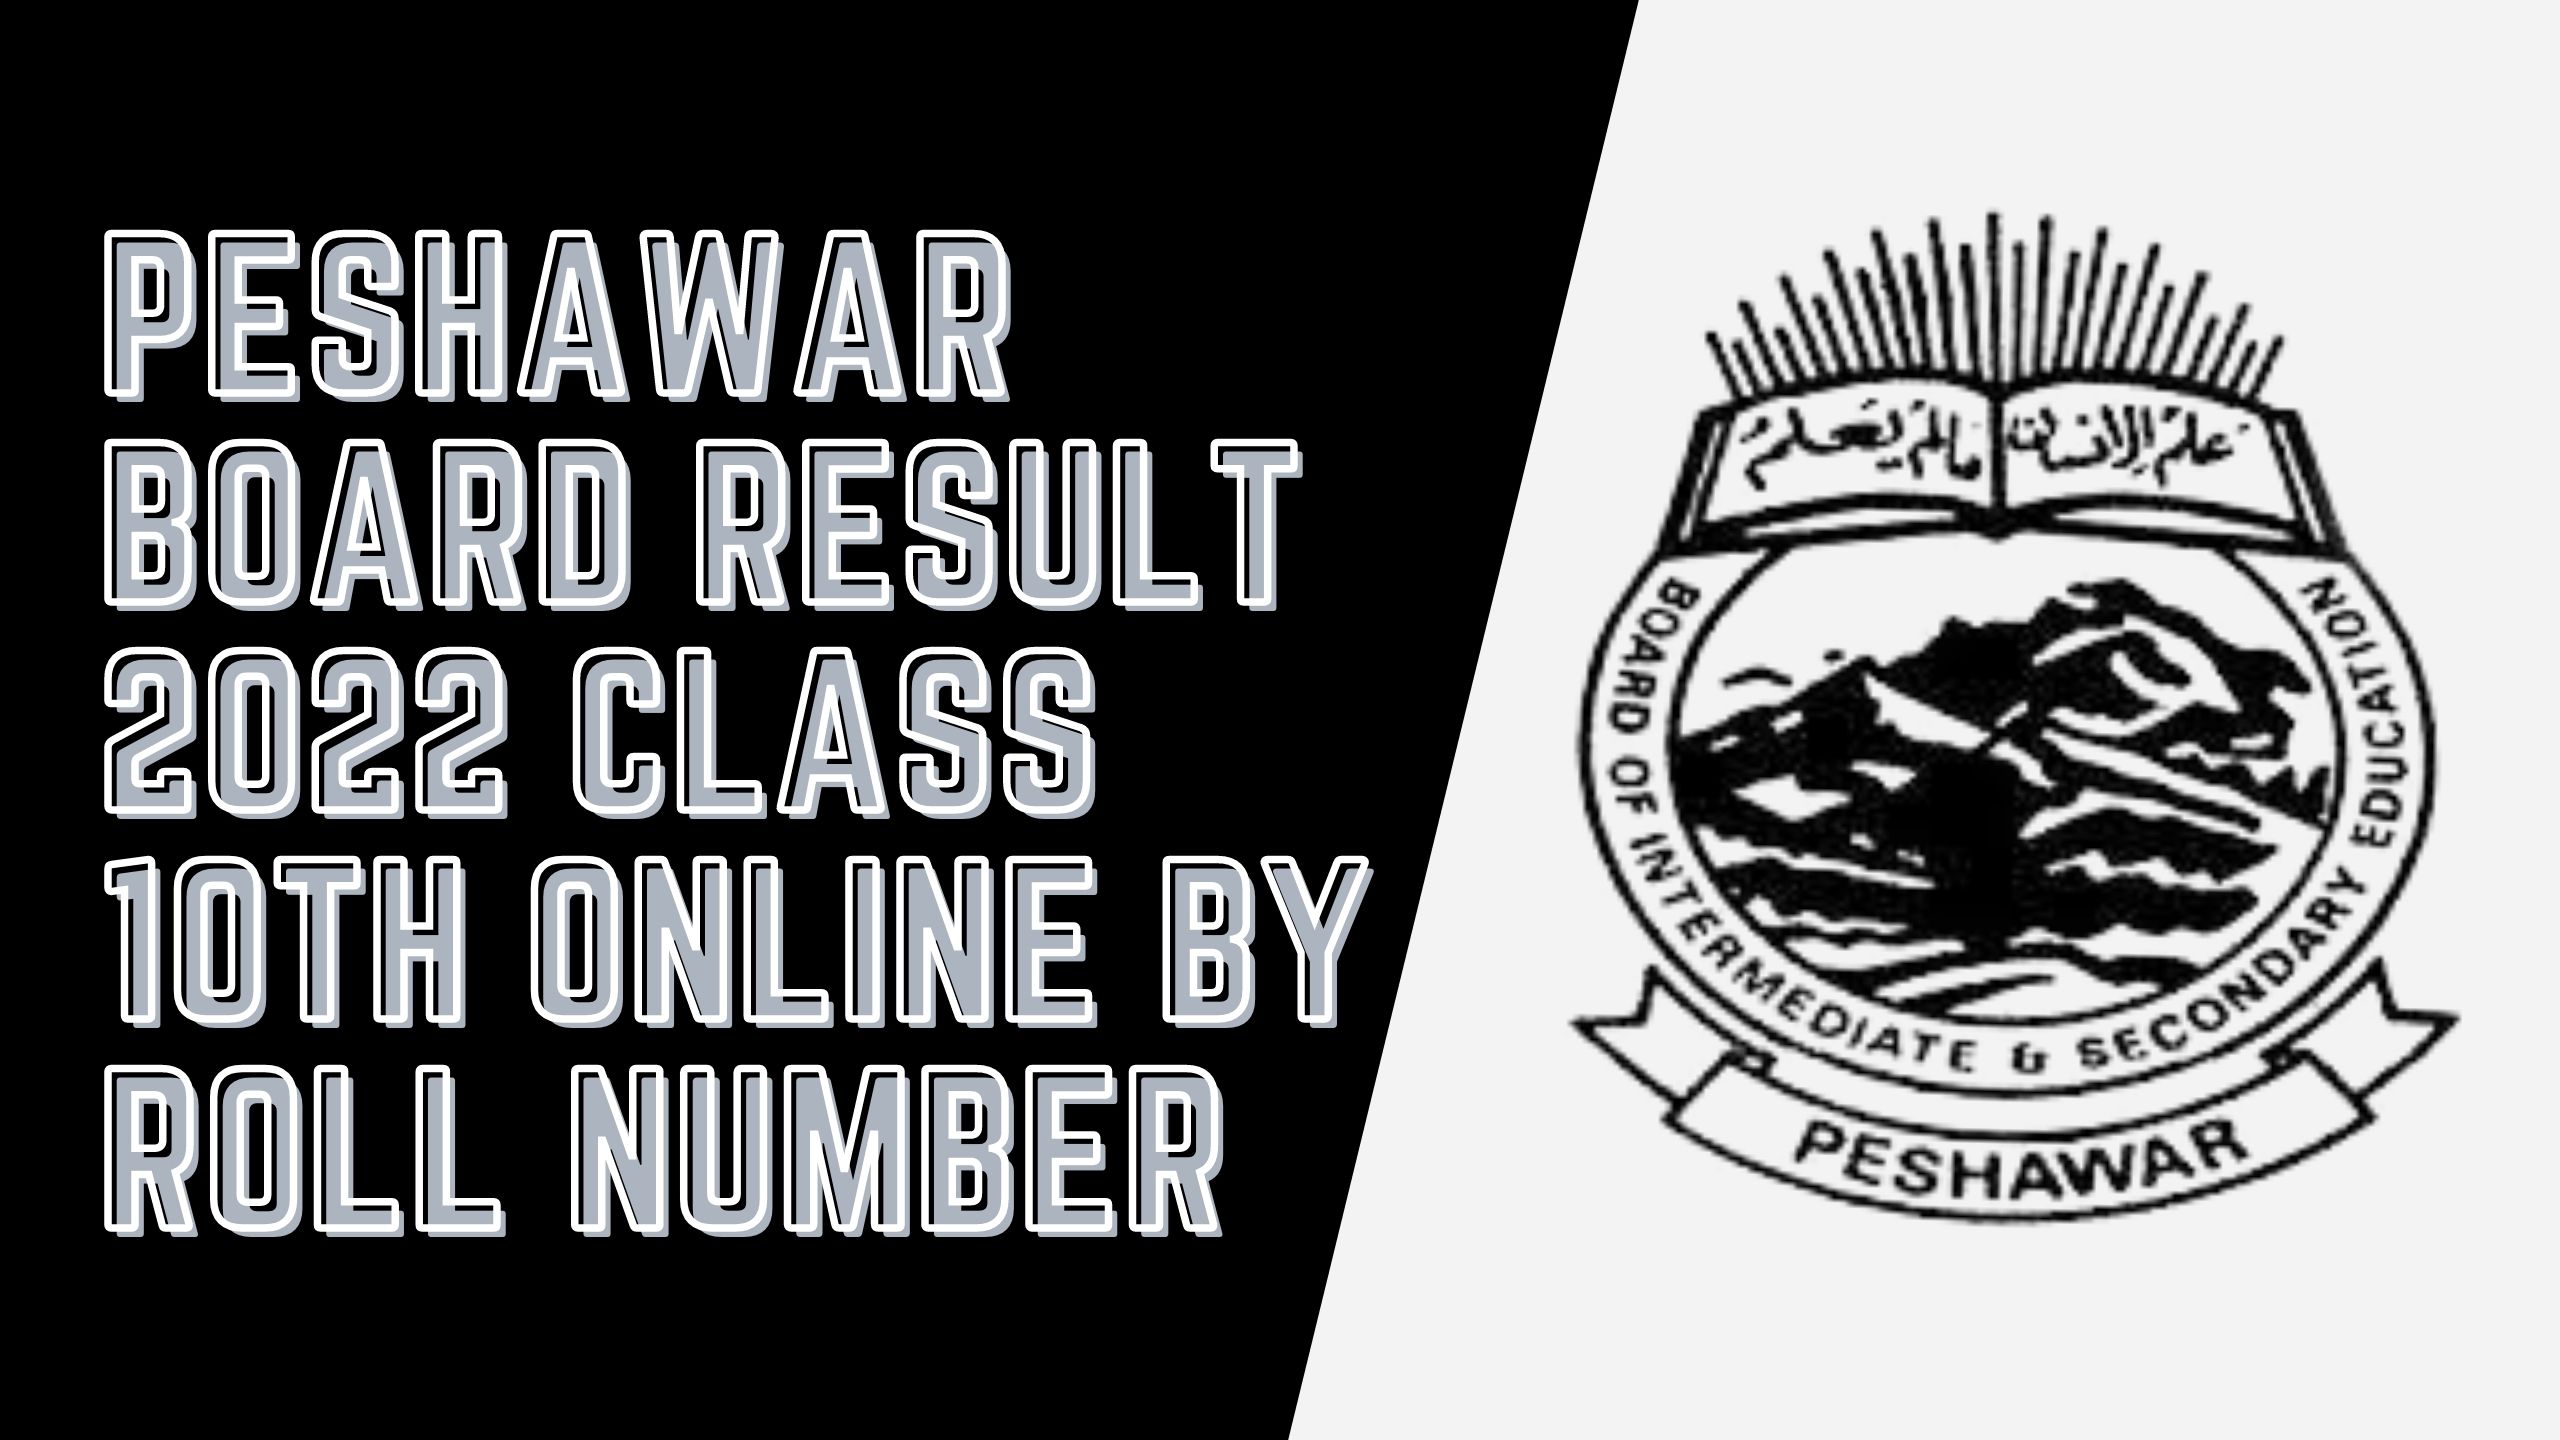 Peshawar Board Result 2022 Class 10th Online By Roll Number